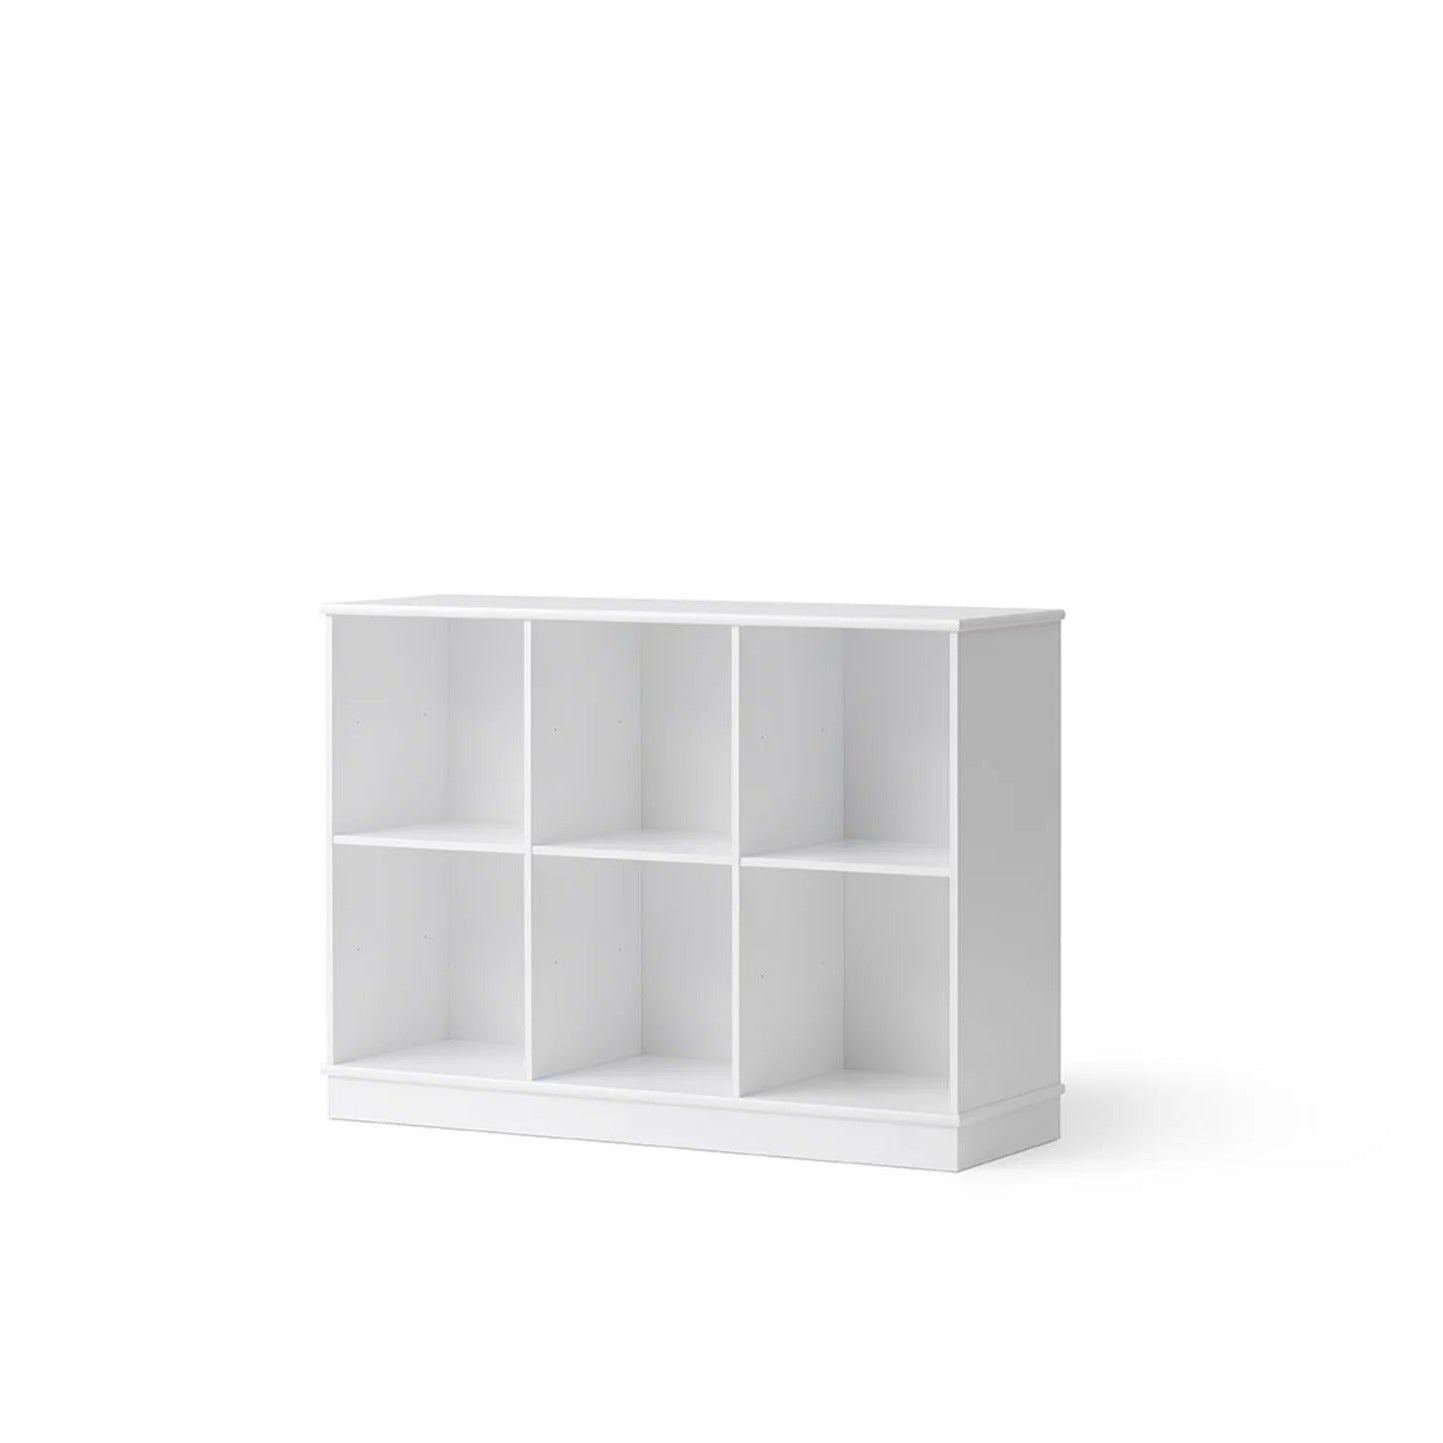 Oliver Furniture Wood Standing Shelving Unit - 3 x 2 With Base